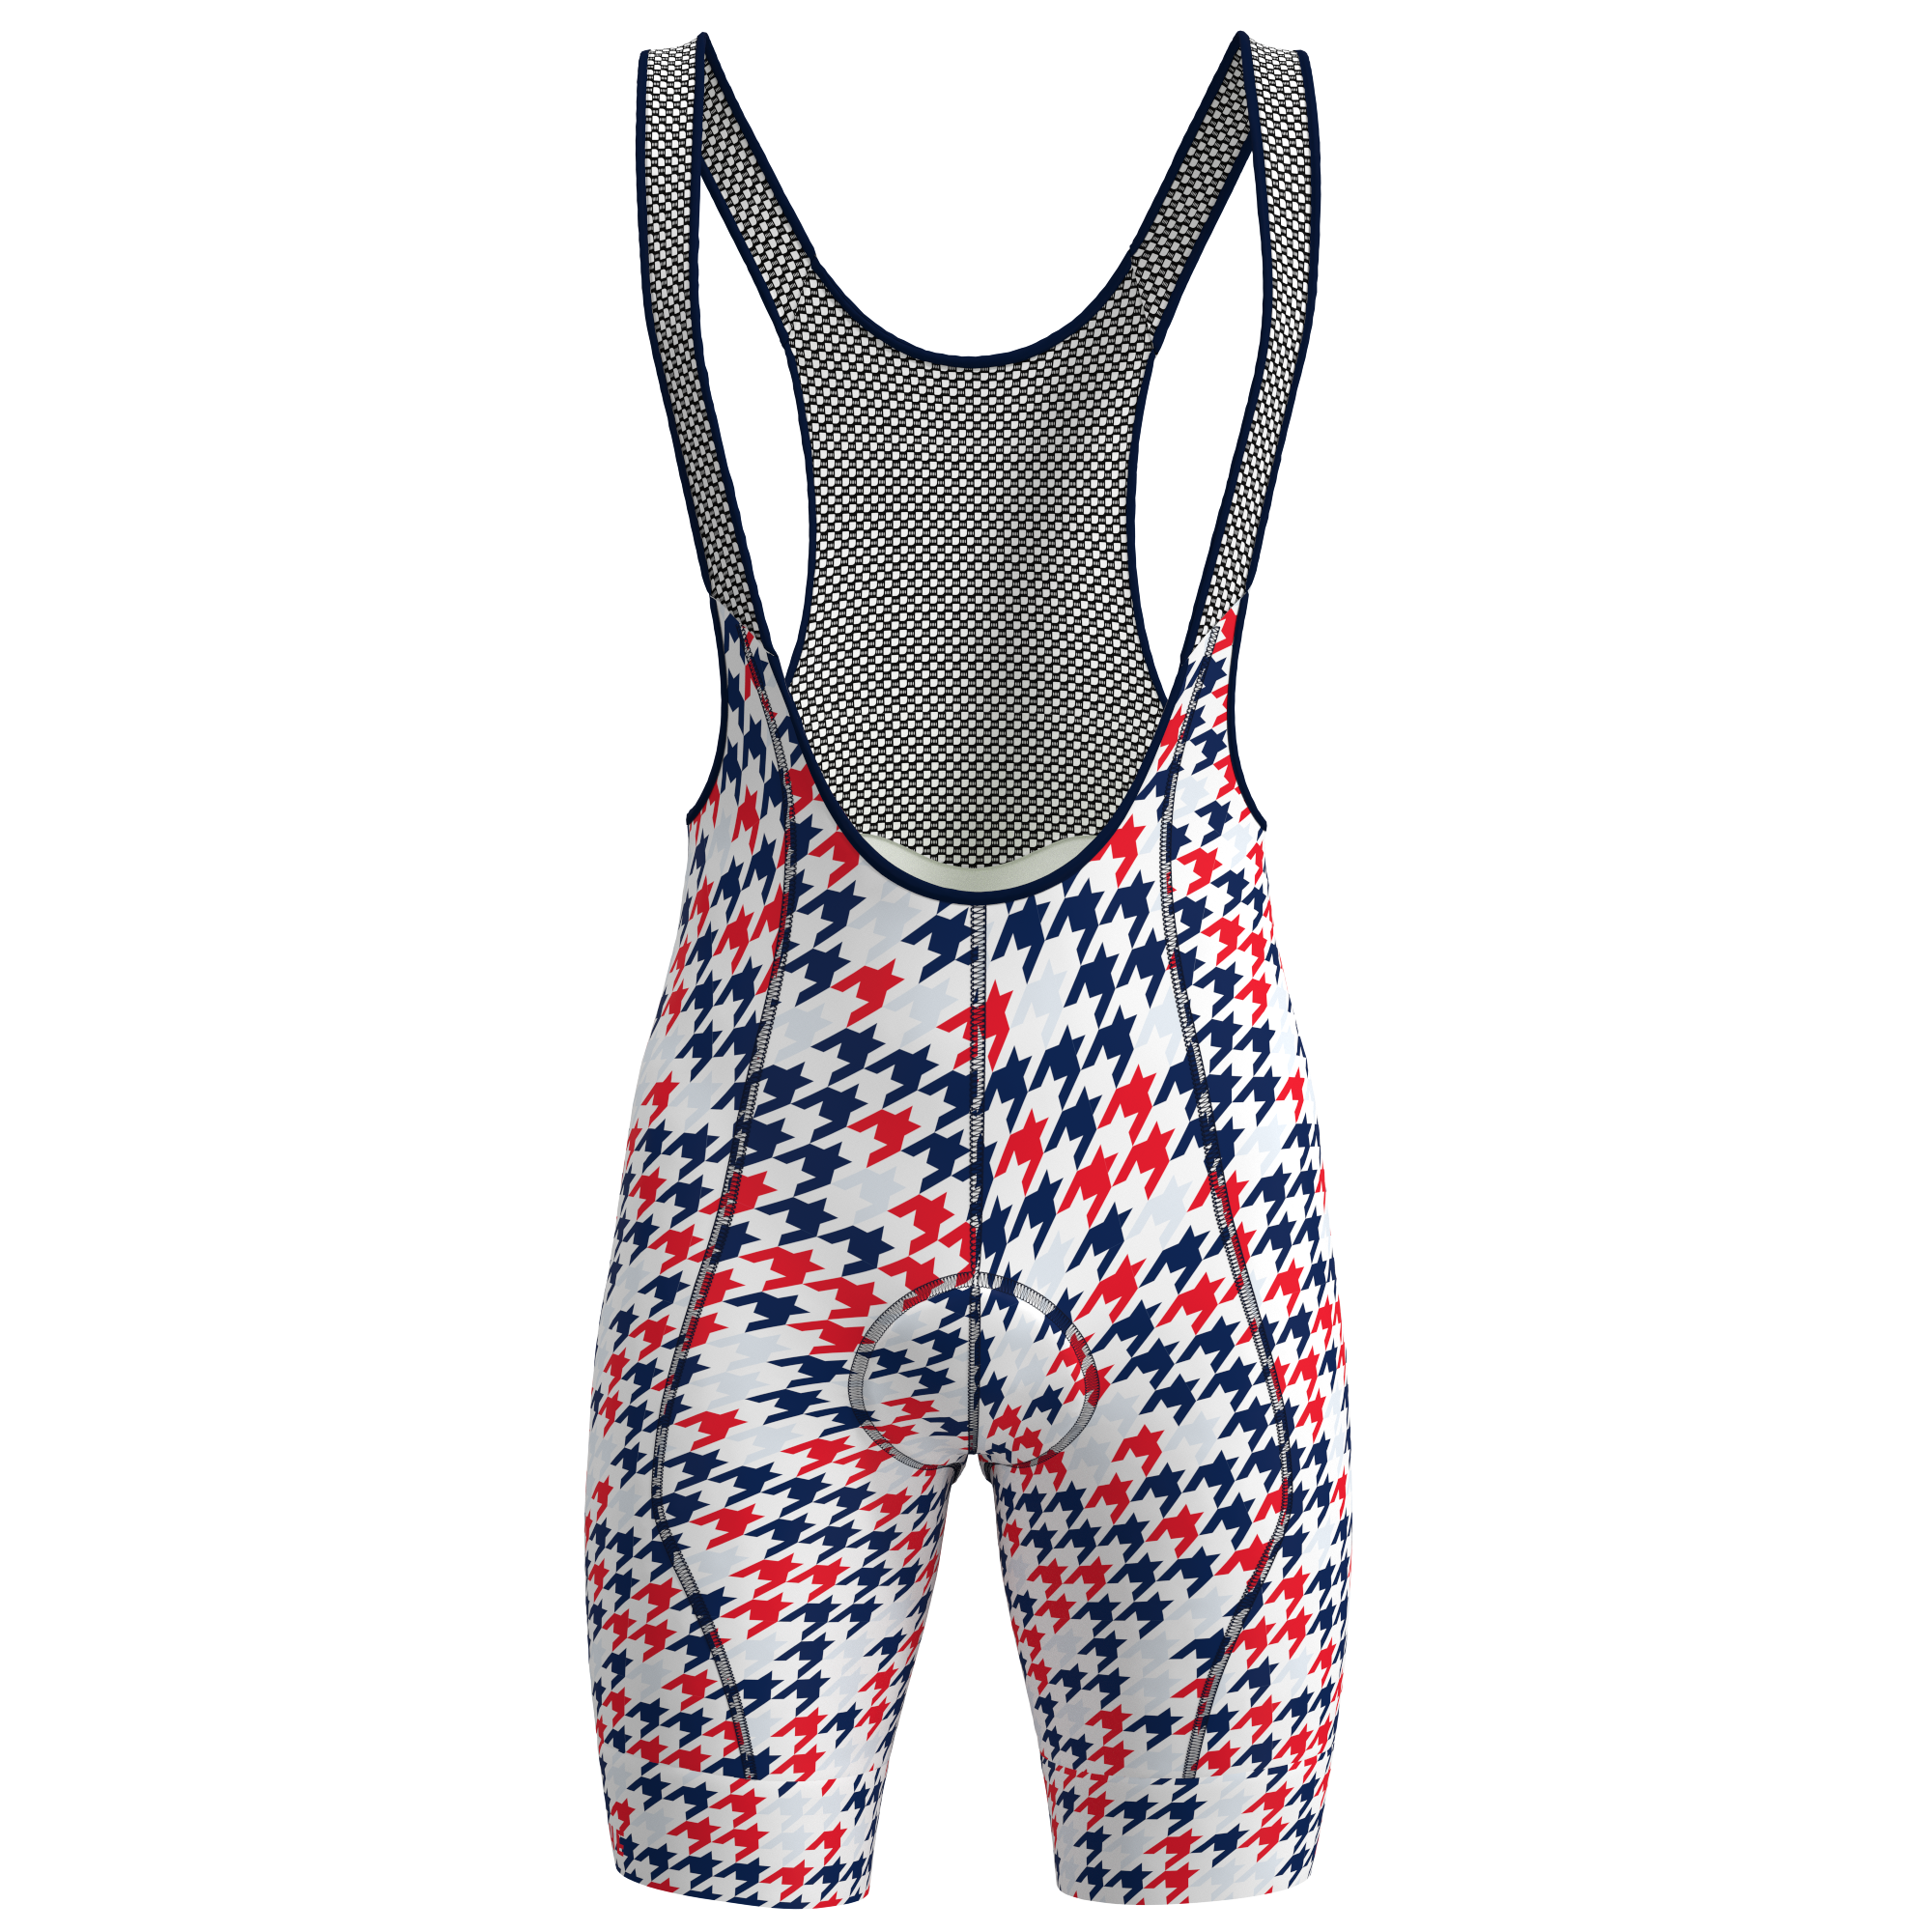 Men's WT Bib Short - Red, White and Blue Houndstooth